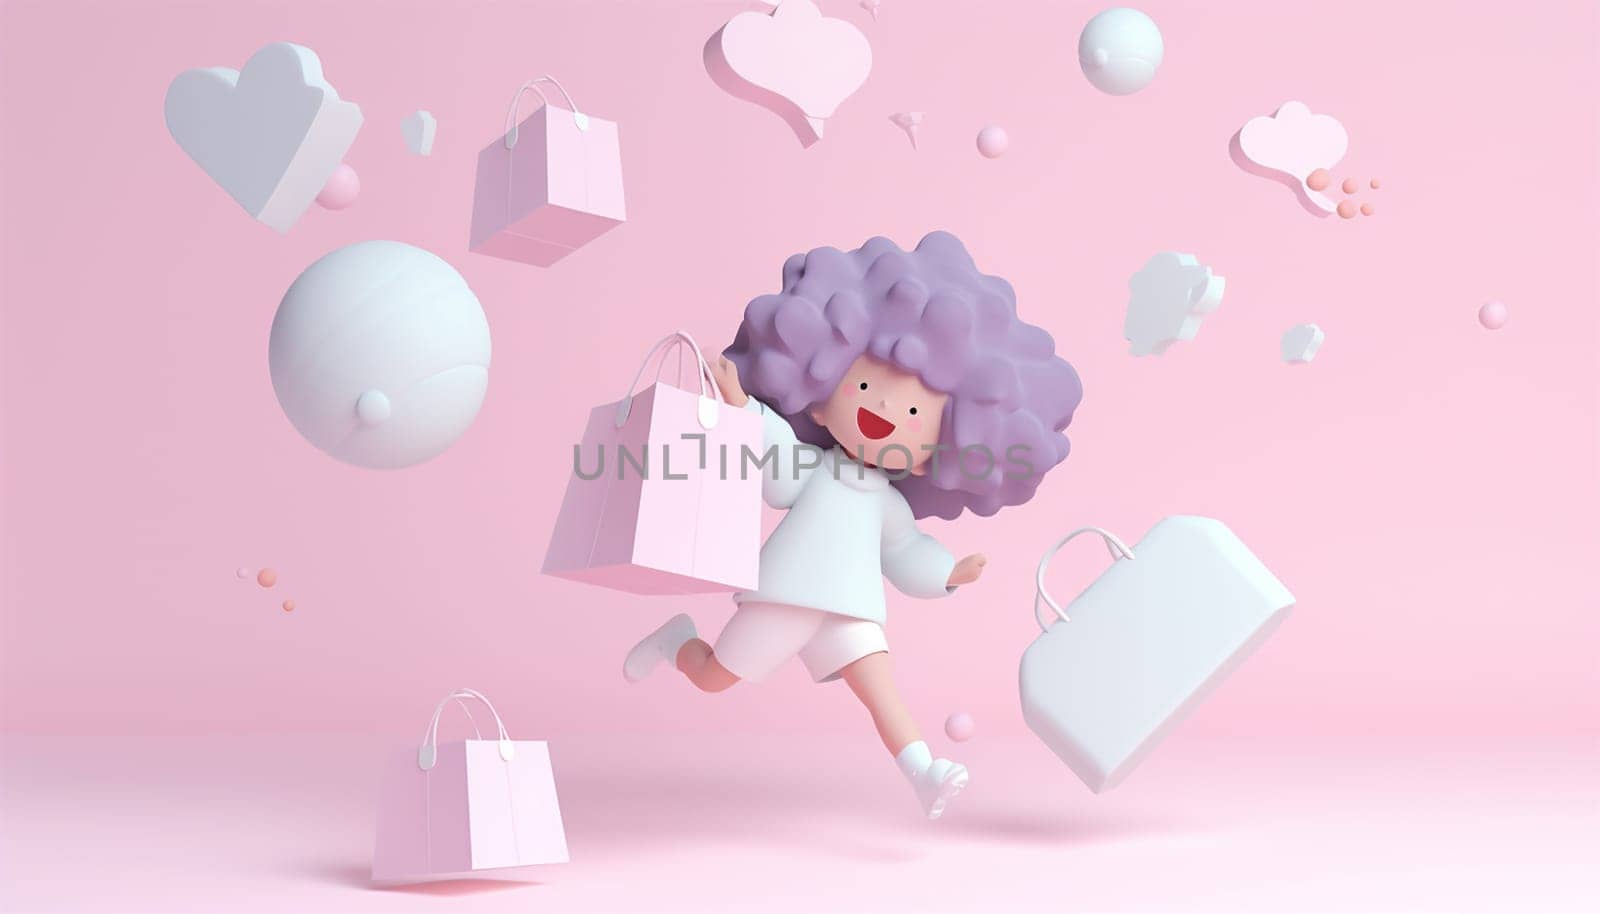 Afro american animation girl shopping. 3D pastel pink background. Portrait of positive cheerful afro american girl have fun on free time hold bags addicted shopper want shop all bargains wear style outfit pants trousers isolated over pastel pink color background copy space Space for text